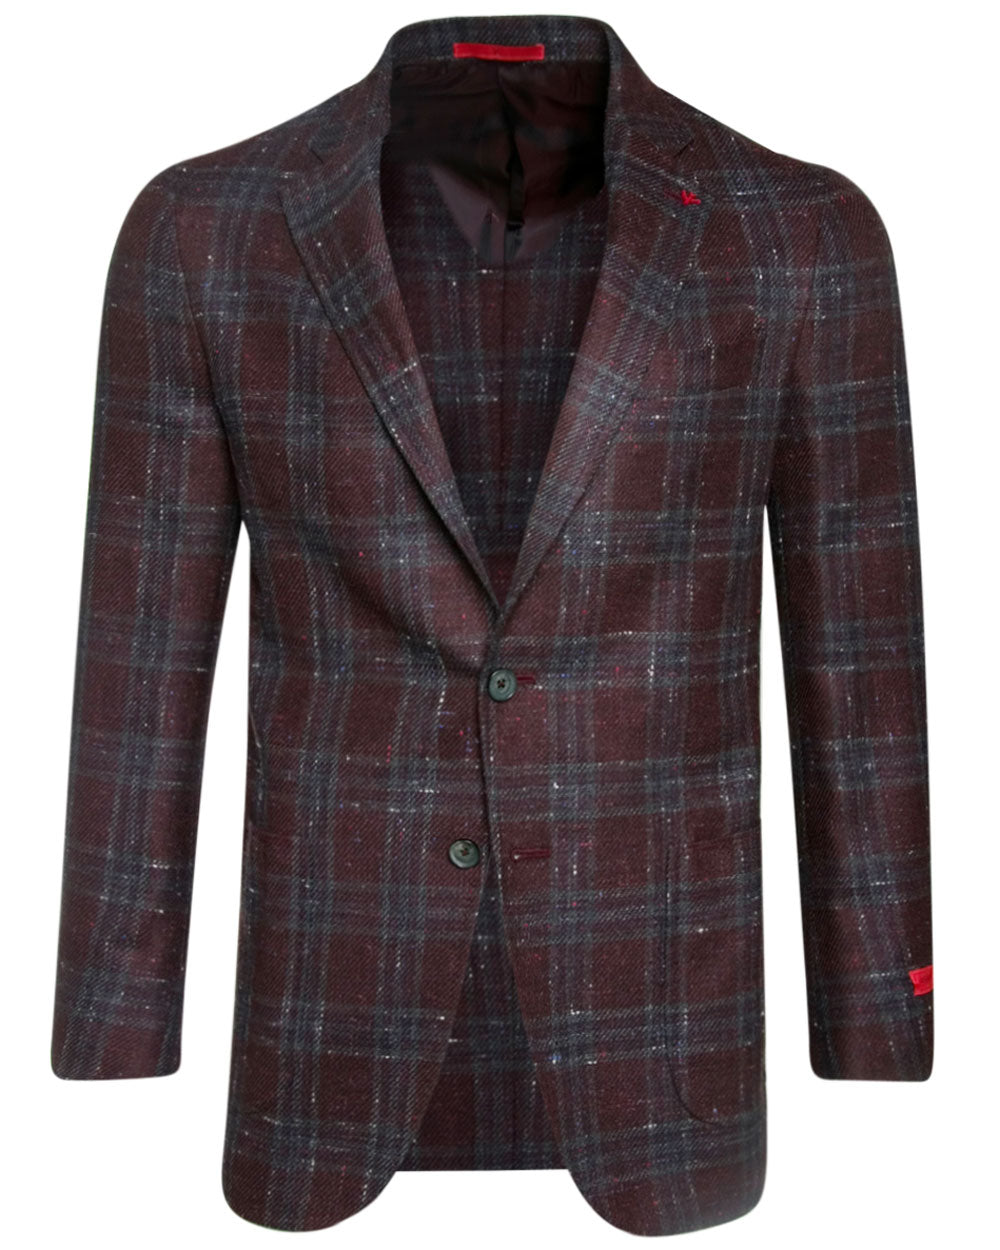 Donegal Sportcoat in Red